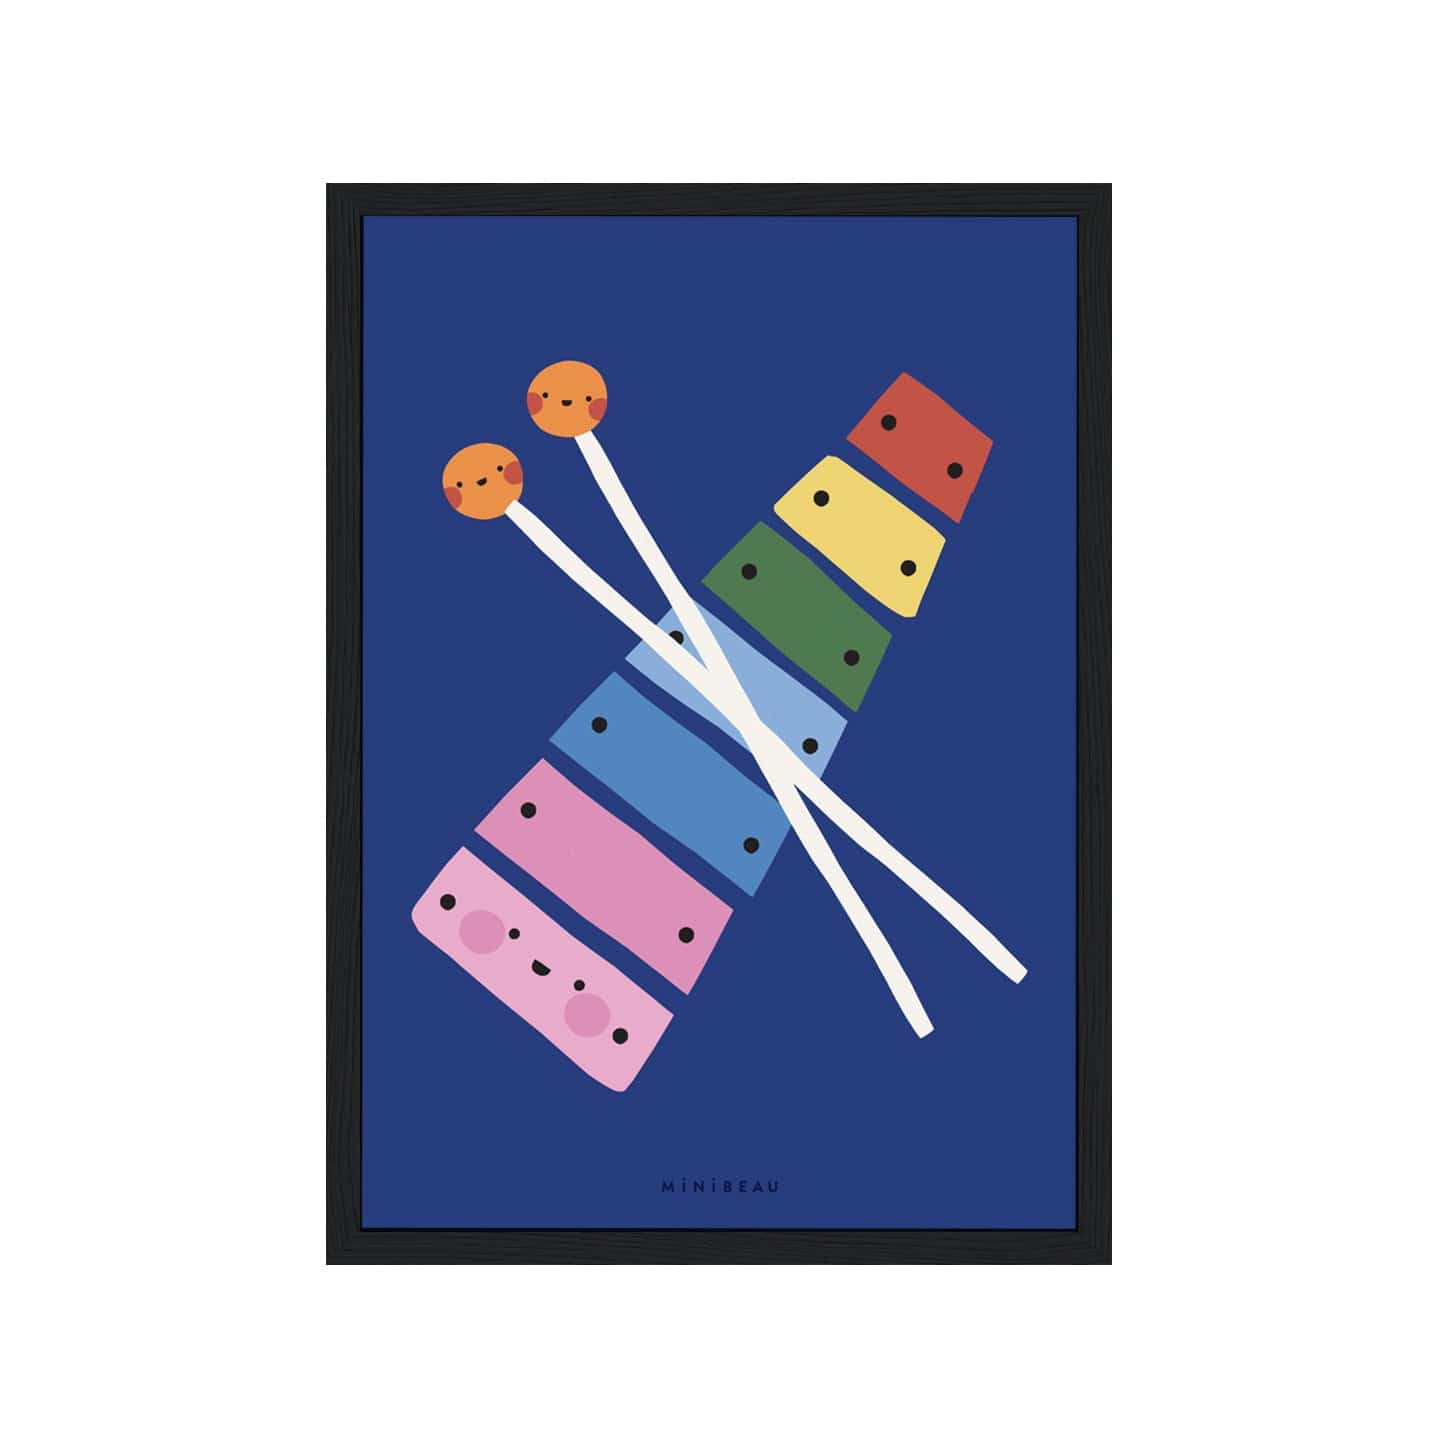 Art print in black frame. Our Happy Alphabet 'X' Art Print shows a smiling xylophone with bars in rainbow colours, crossed by smiling beaters, creating an X shape on a dark blue background.